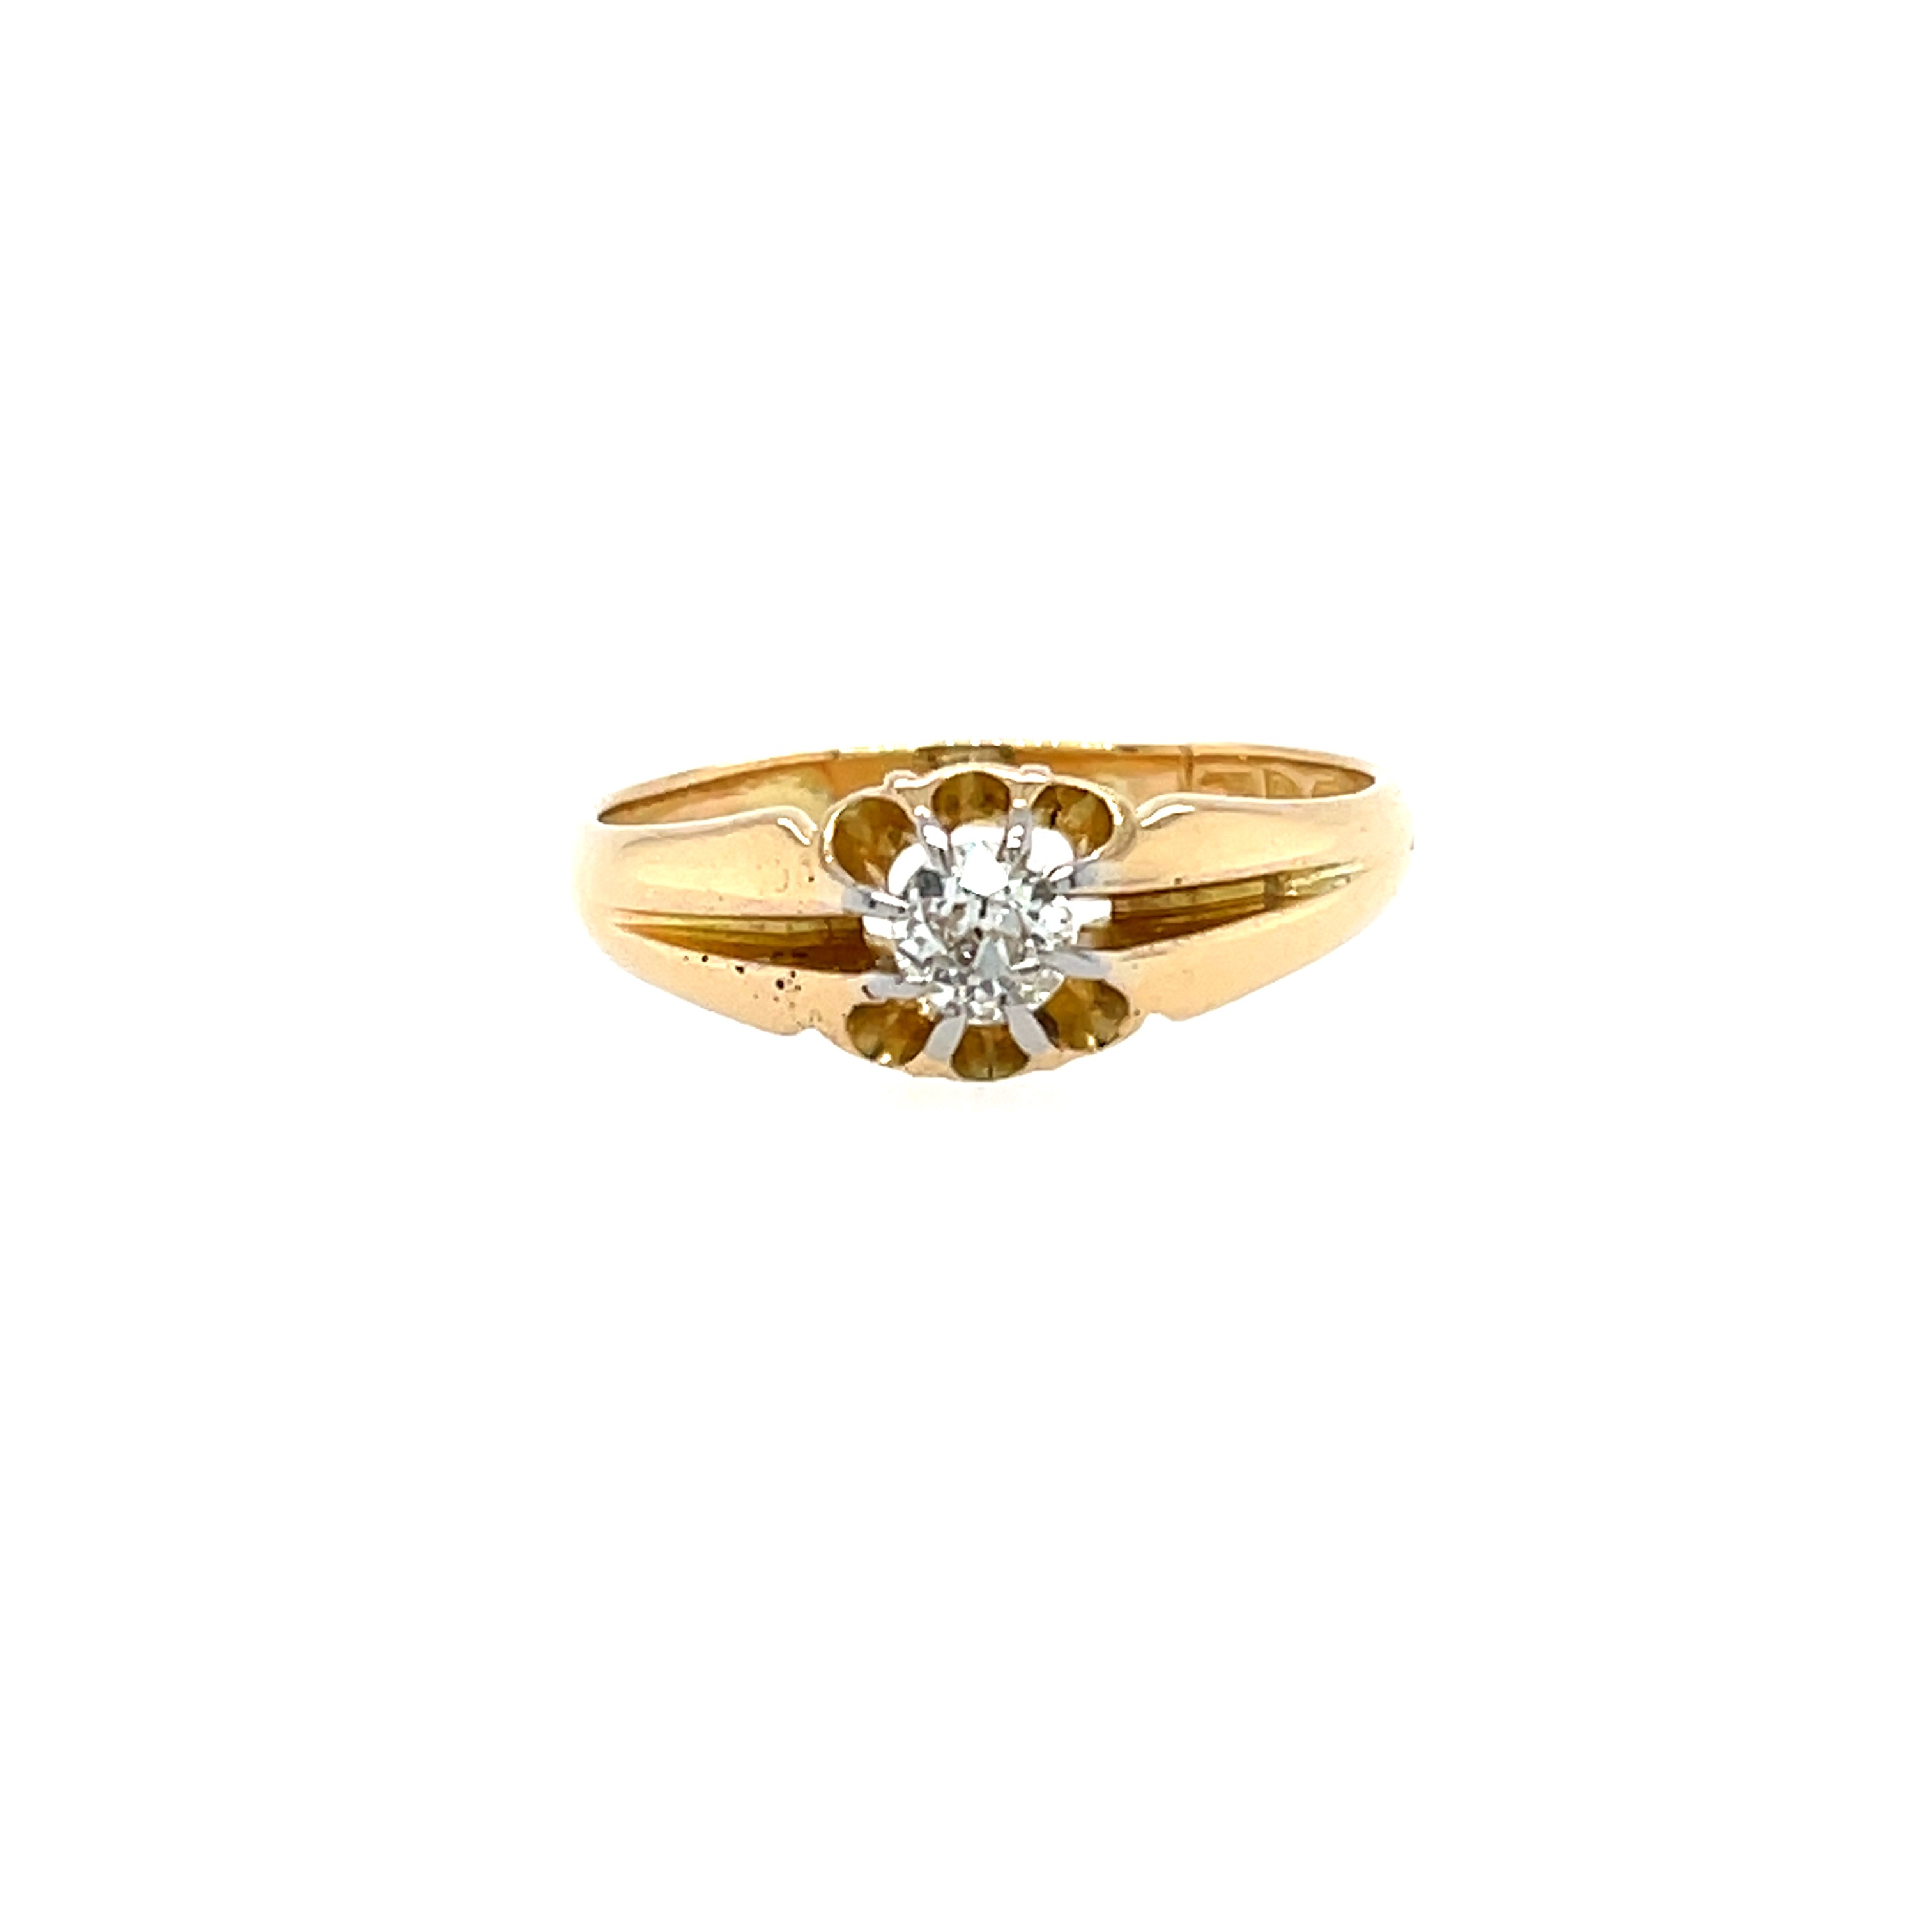 Antique 18ct Yellow Gold 0.33ct Old European Cut Diamond Gypsy Ring Chester 1911